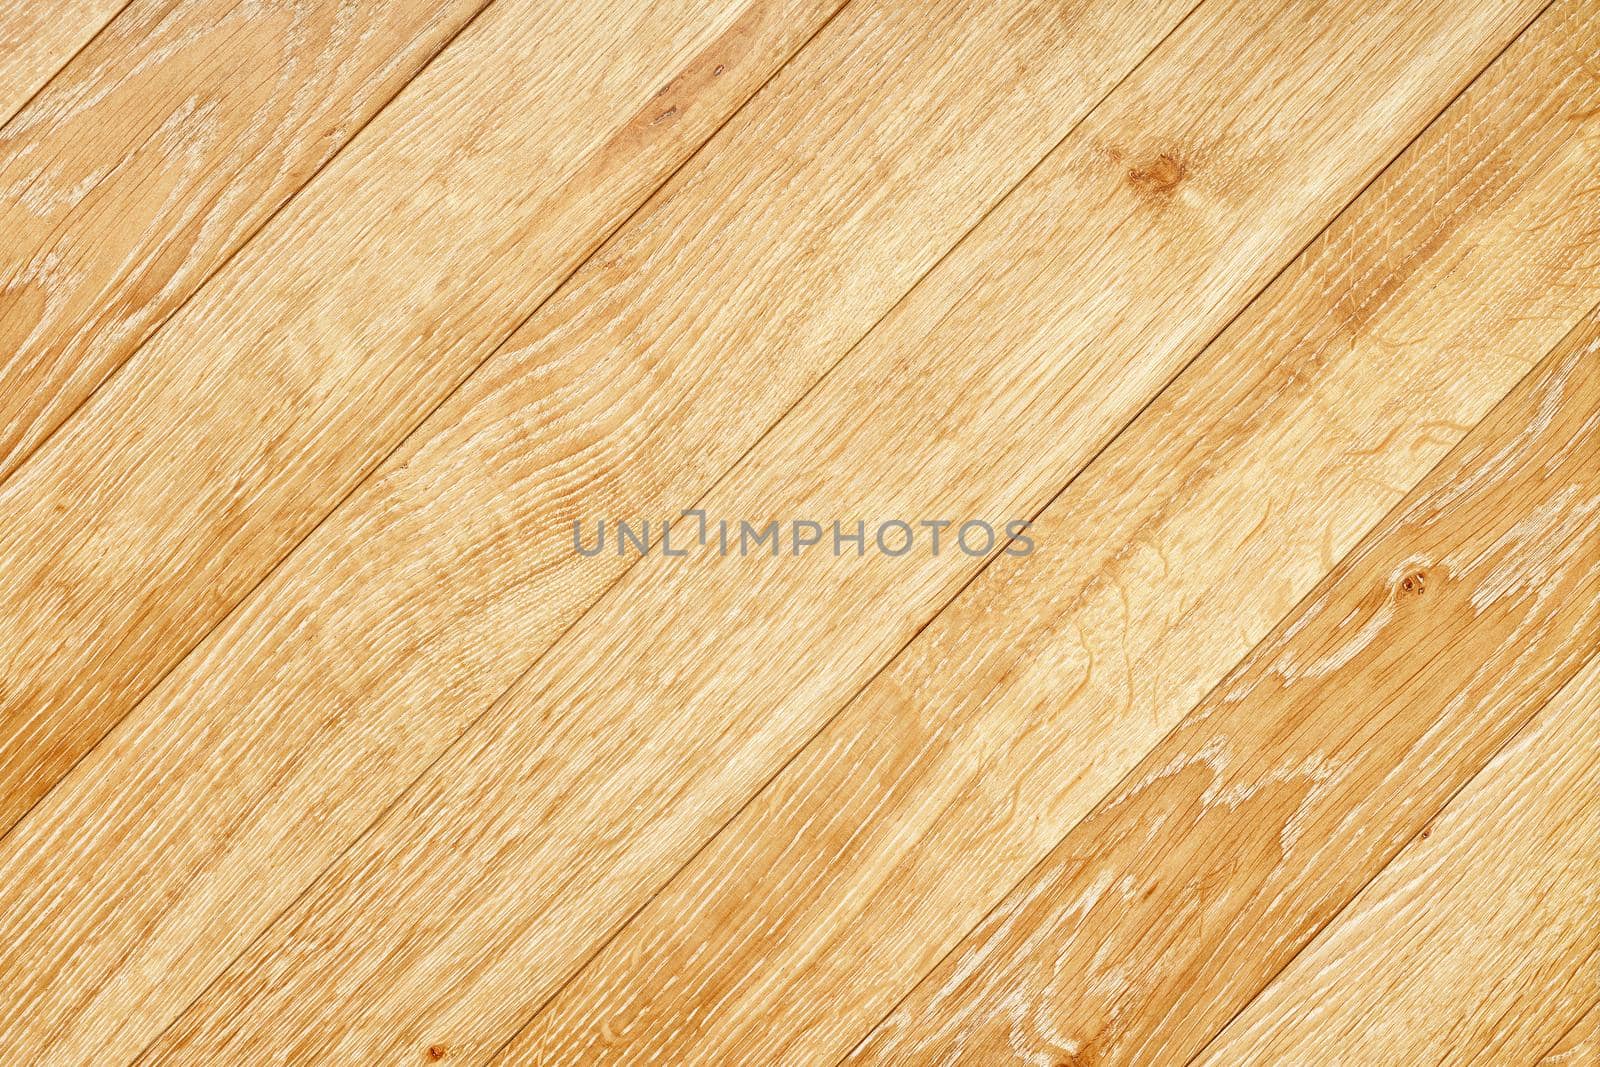 A beautiful pattern of light oak wood in the form of a smooth wooden surface with diagonal grain lines.